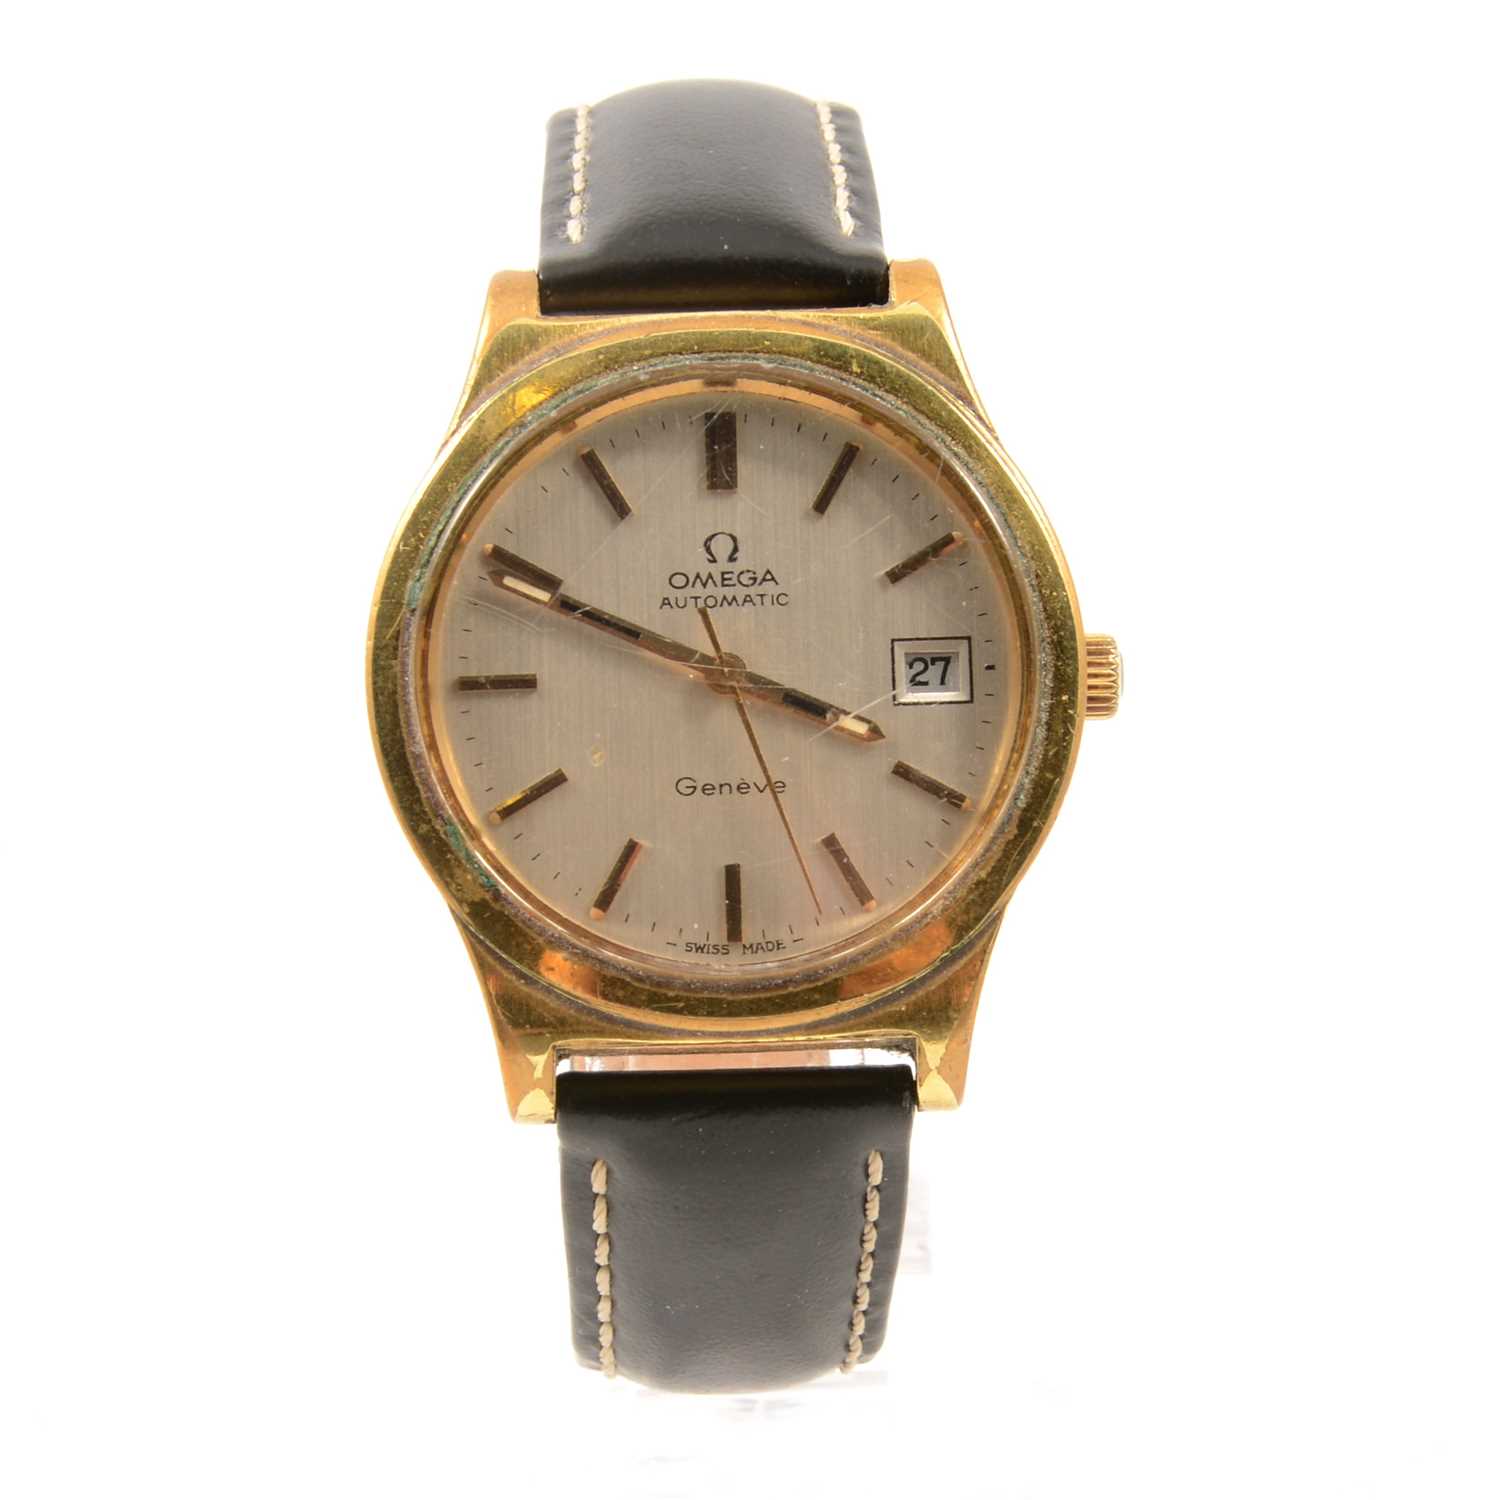 Lot 323 - Omega - a gentleman's Geneve gold-plated automatic wristwatch.